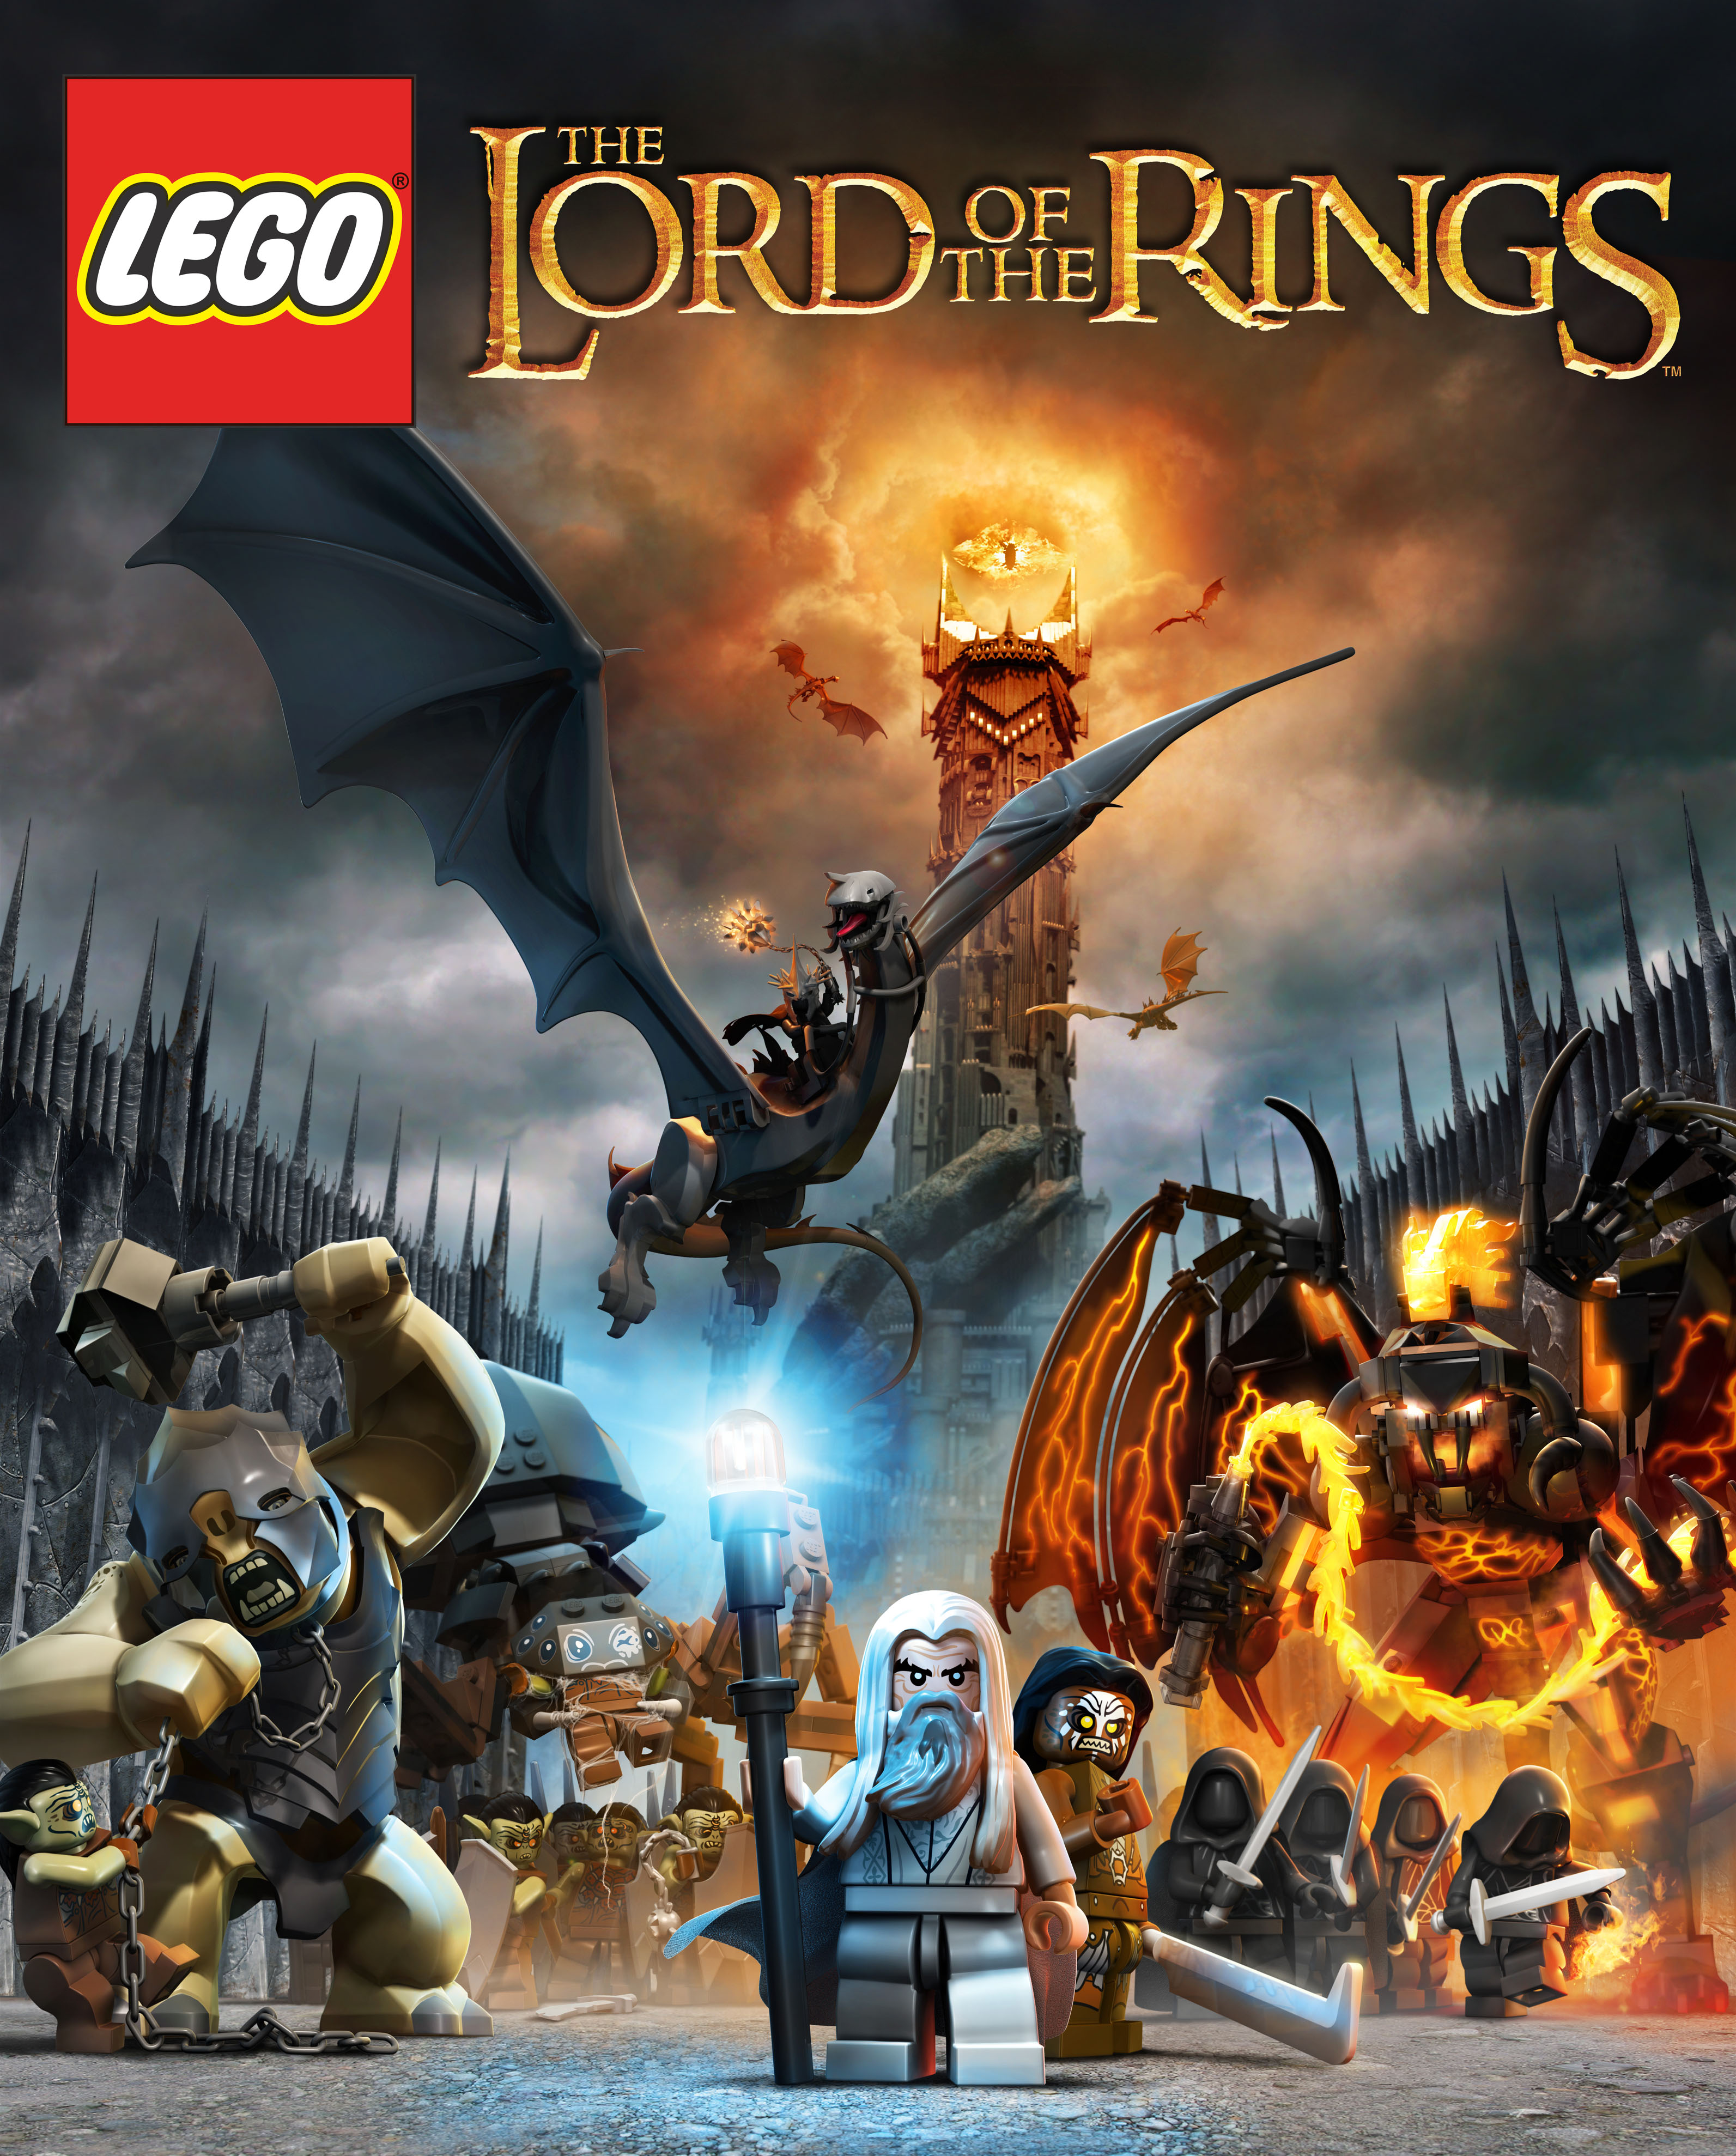 LEGO The Lord of the Rings Video Free on Humble Bundle - Brick